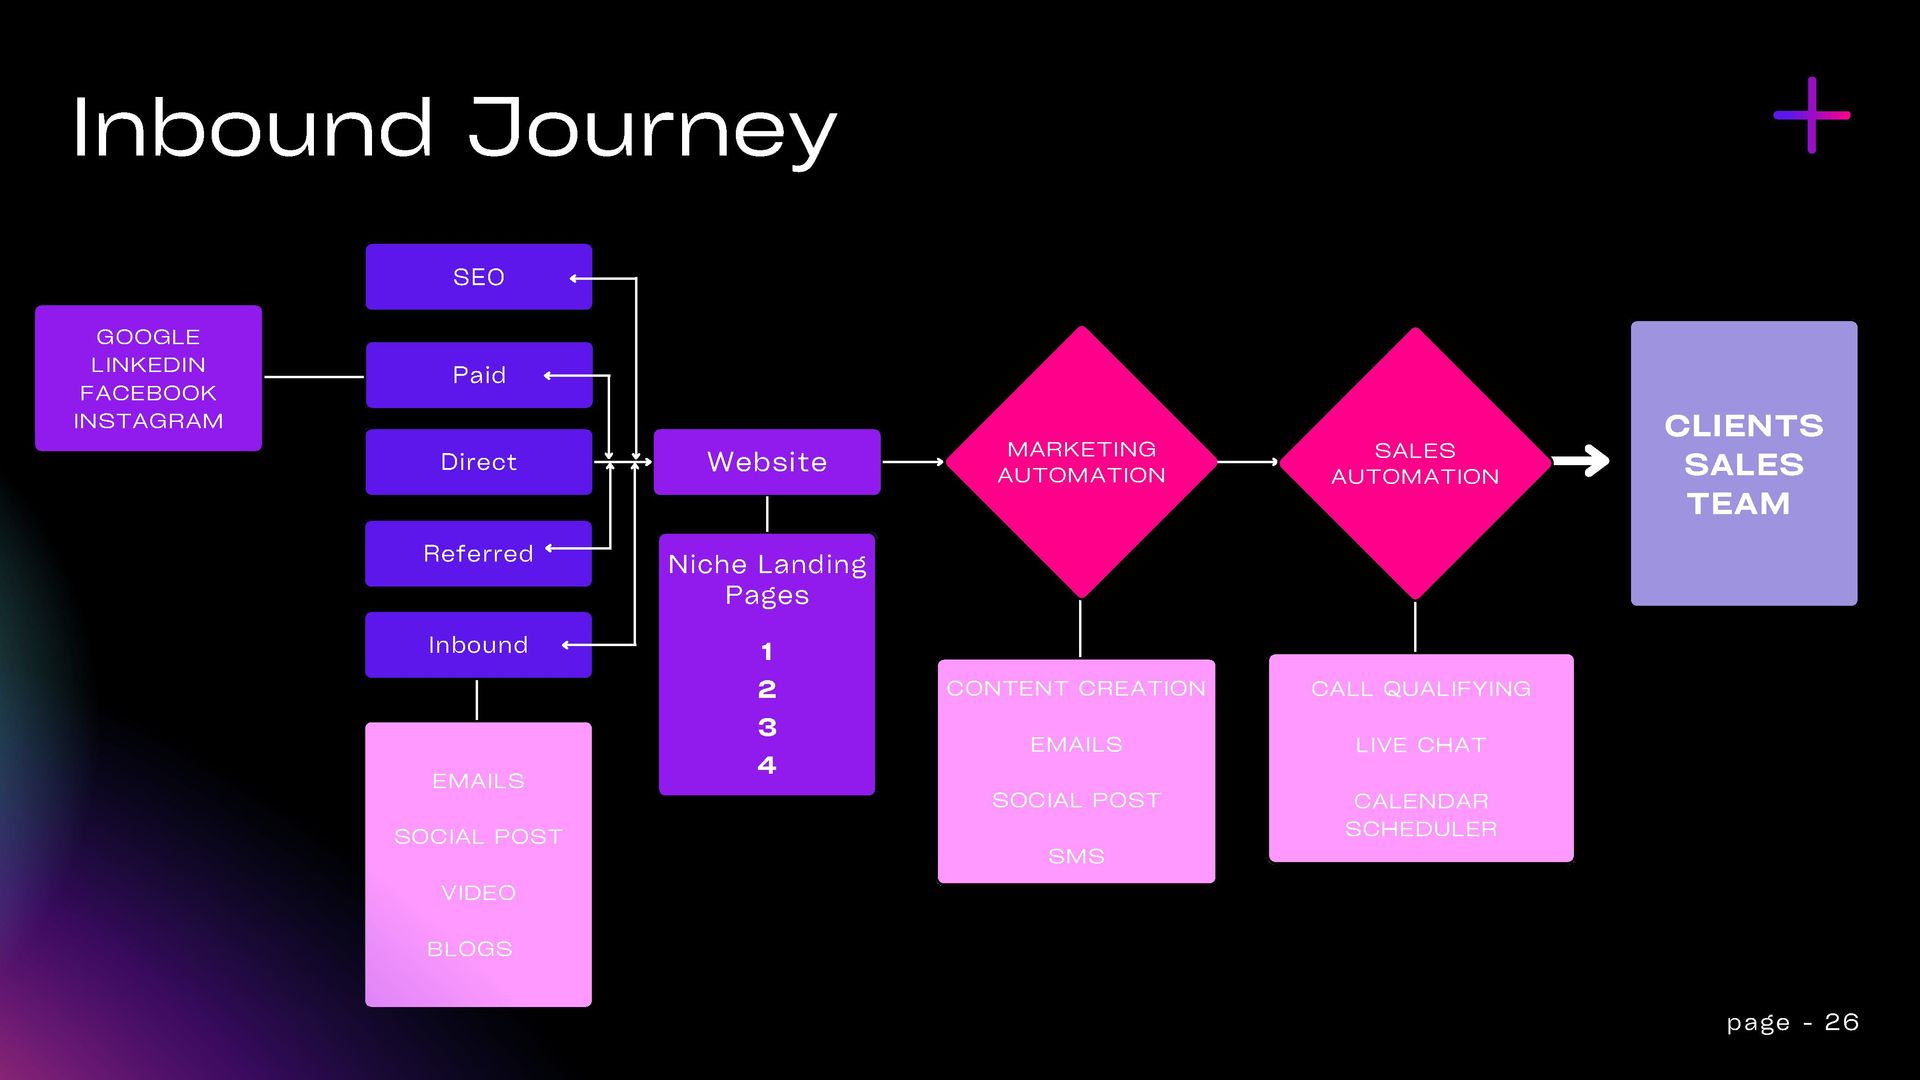 A flow chart showing the inbound journey of a customer